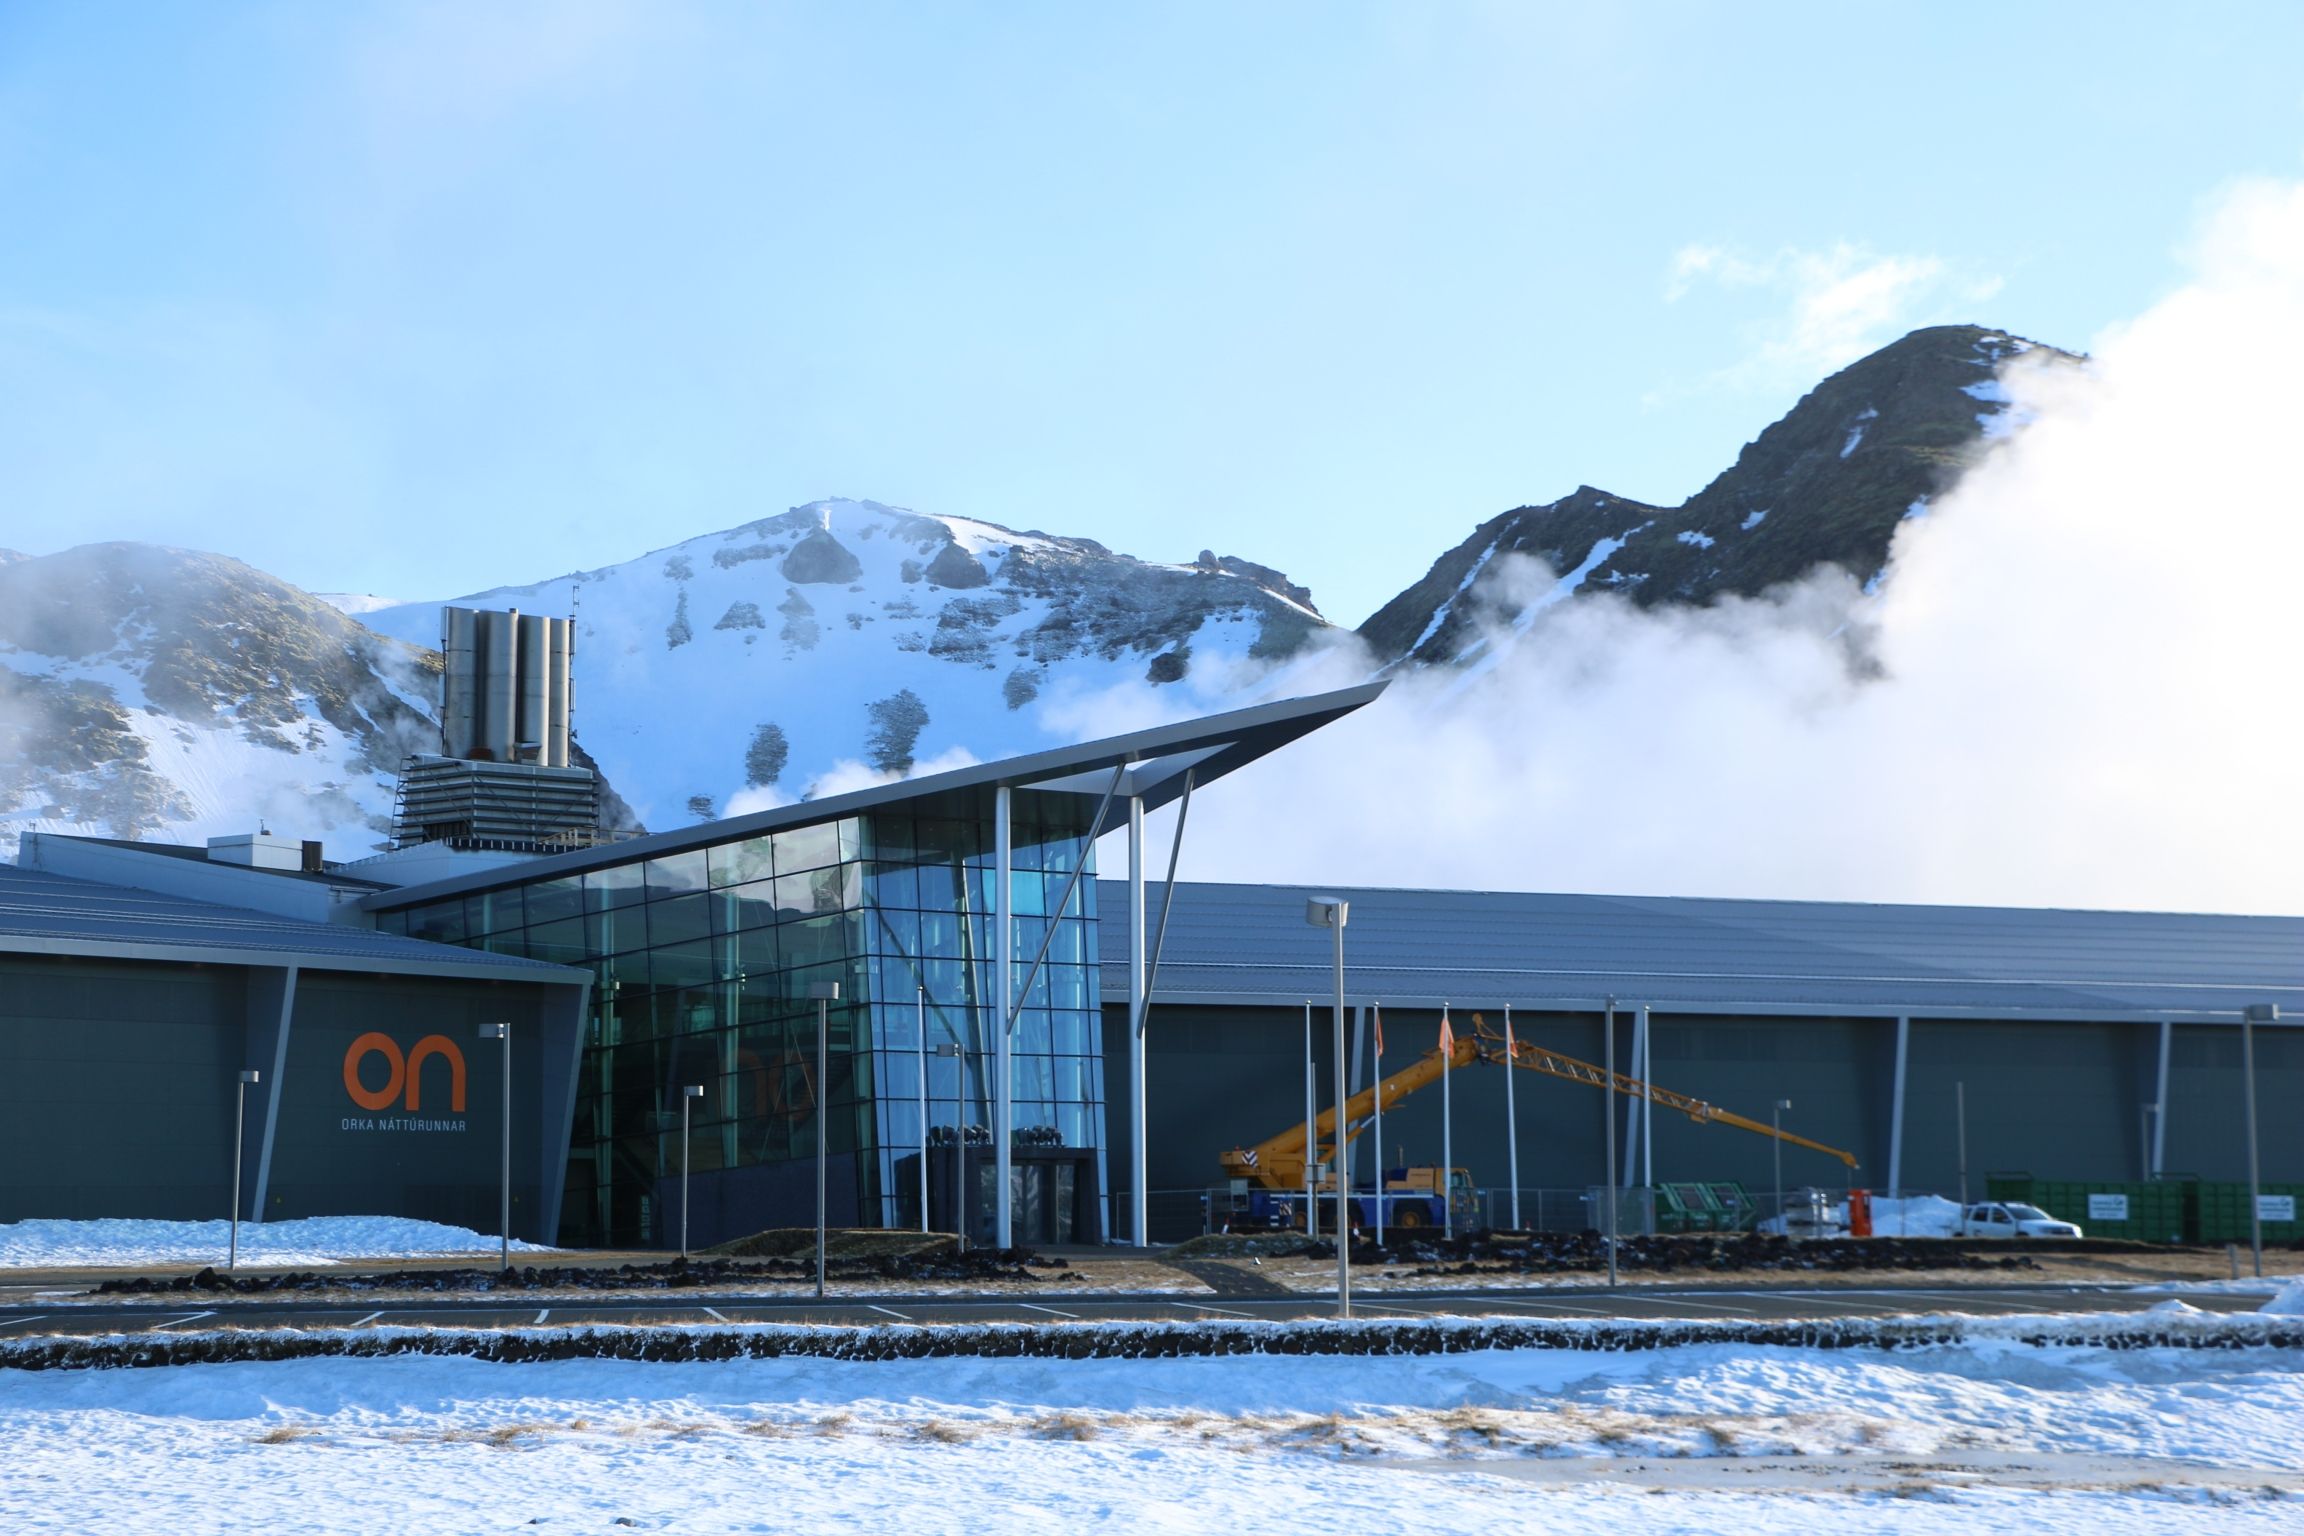 The Hellisheiði geothermal plant is run by Reykjavik Energy, and it powers more than half of Iceland. Image by Ari Daniel. Iceland, 2019.